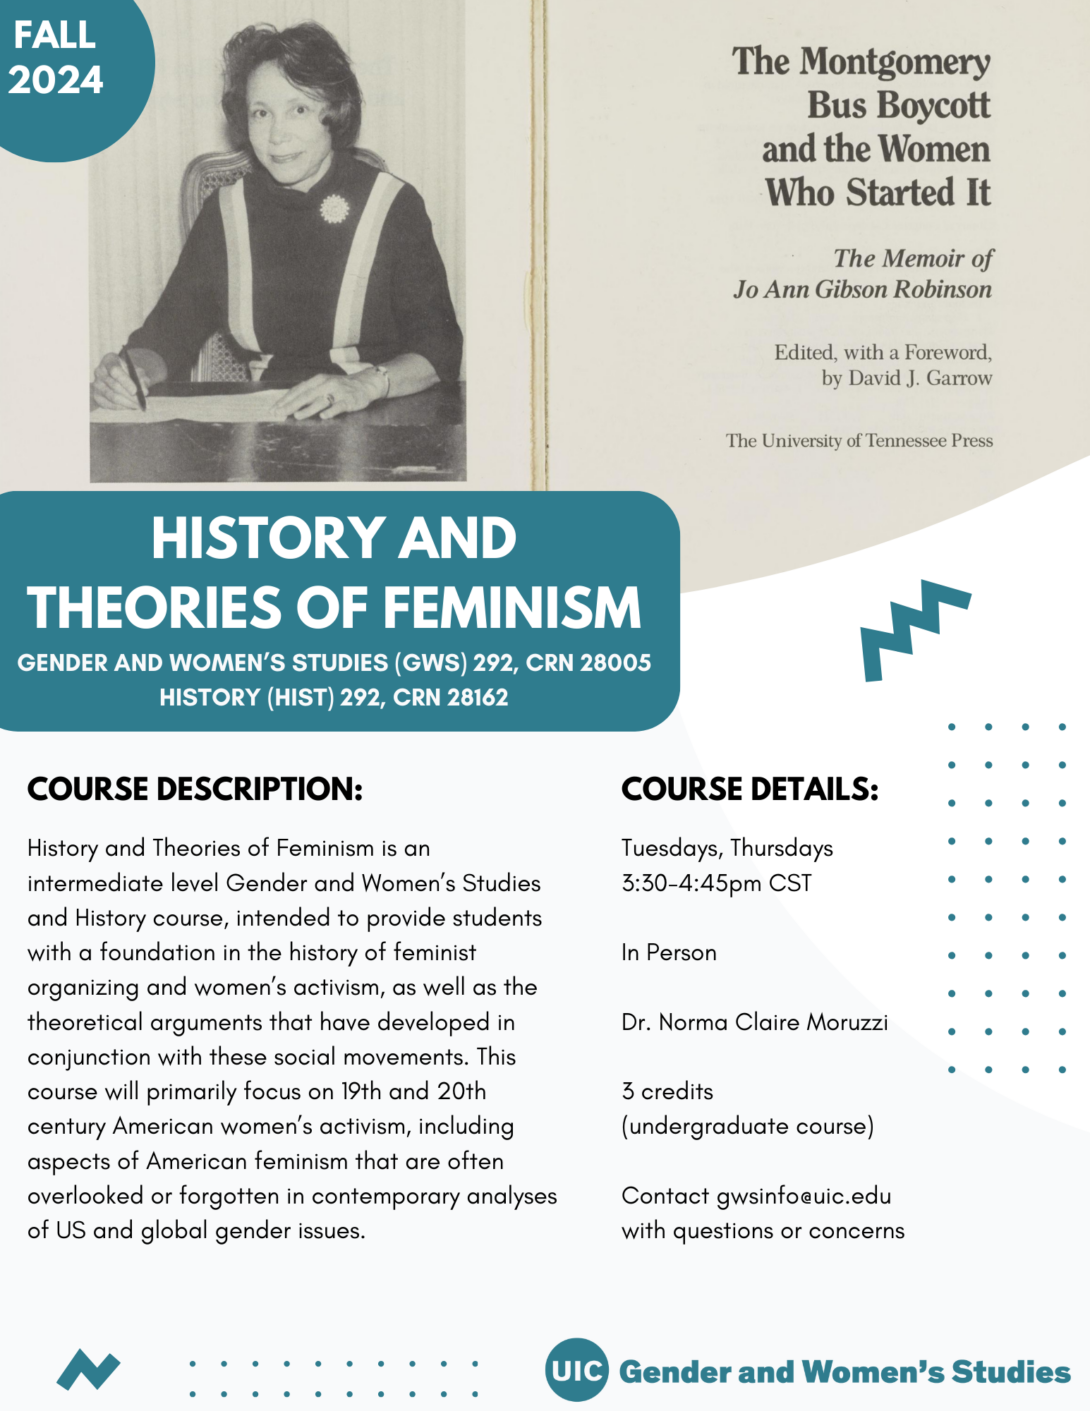 A flyer promoting the fall 2024 History and Theories of Feminism course. The top portion of the flyer includes a photo of Jo Ann Gibson Robinson and the title page of her memoir The Montgomery Bus Boycott and the Women Who Started It. In the top left corner is a teal circle with Fall 2024 inside it in white text. The bottom left portion of the photo is covered with a teal block that includes the course title in white text. Below that is the course description and course details in black text on a white background. A teal GWS logo appears in the bottom right of the flyer. Parallel lines of teal dots and teal geometric designs decorate the page.